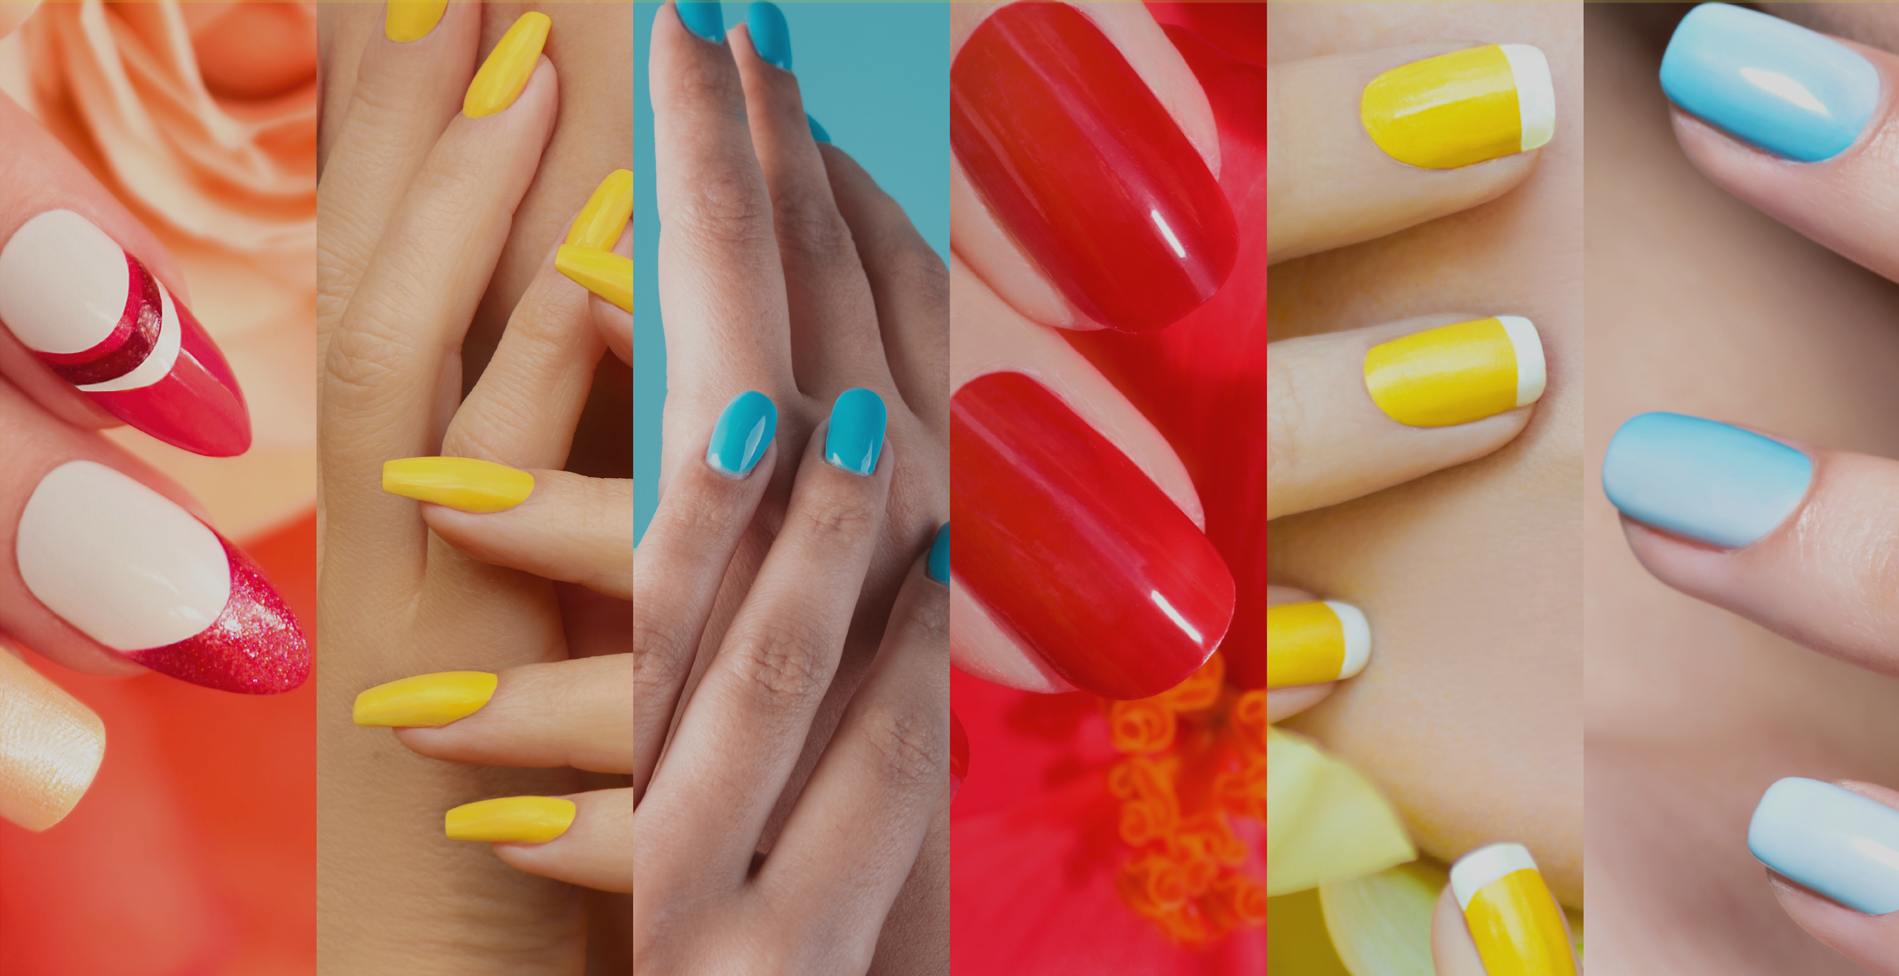 Multi-colored Manicure With Pink, Green, Yellow And Peach Nail Polish  Close-up.Summer Bright Manicure On Short Nails. Stock Photo, Picture and  Royalty Free Image. Image 106360310.